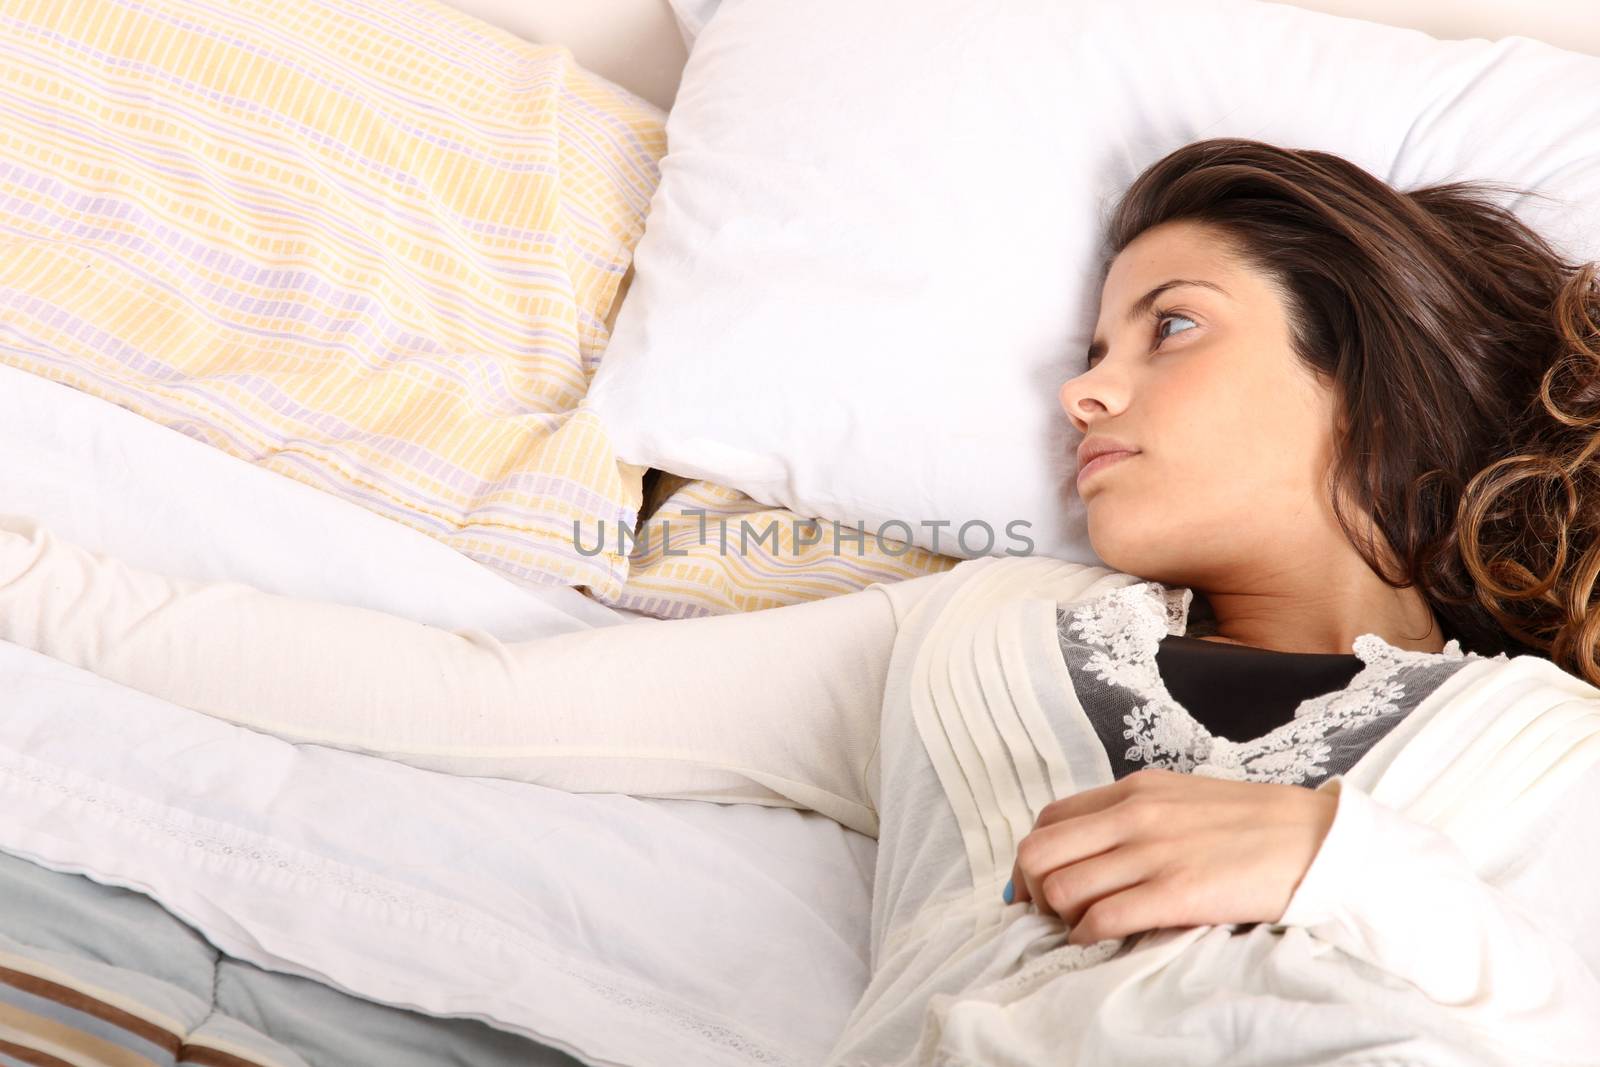 A woman lying alone on the bed.